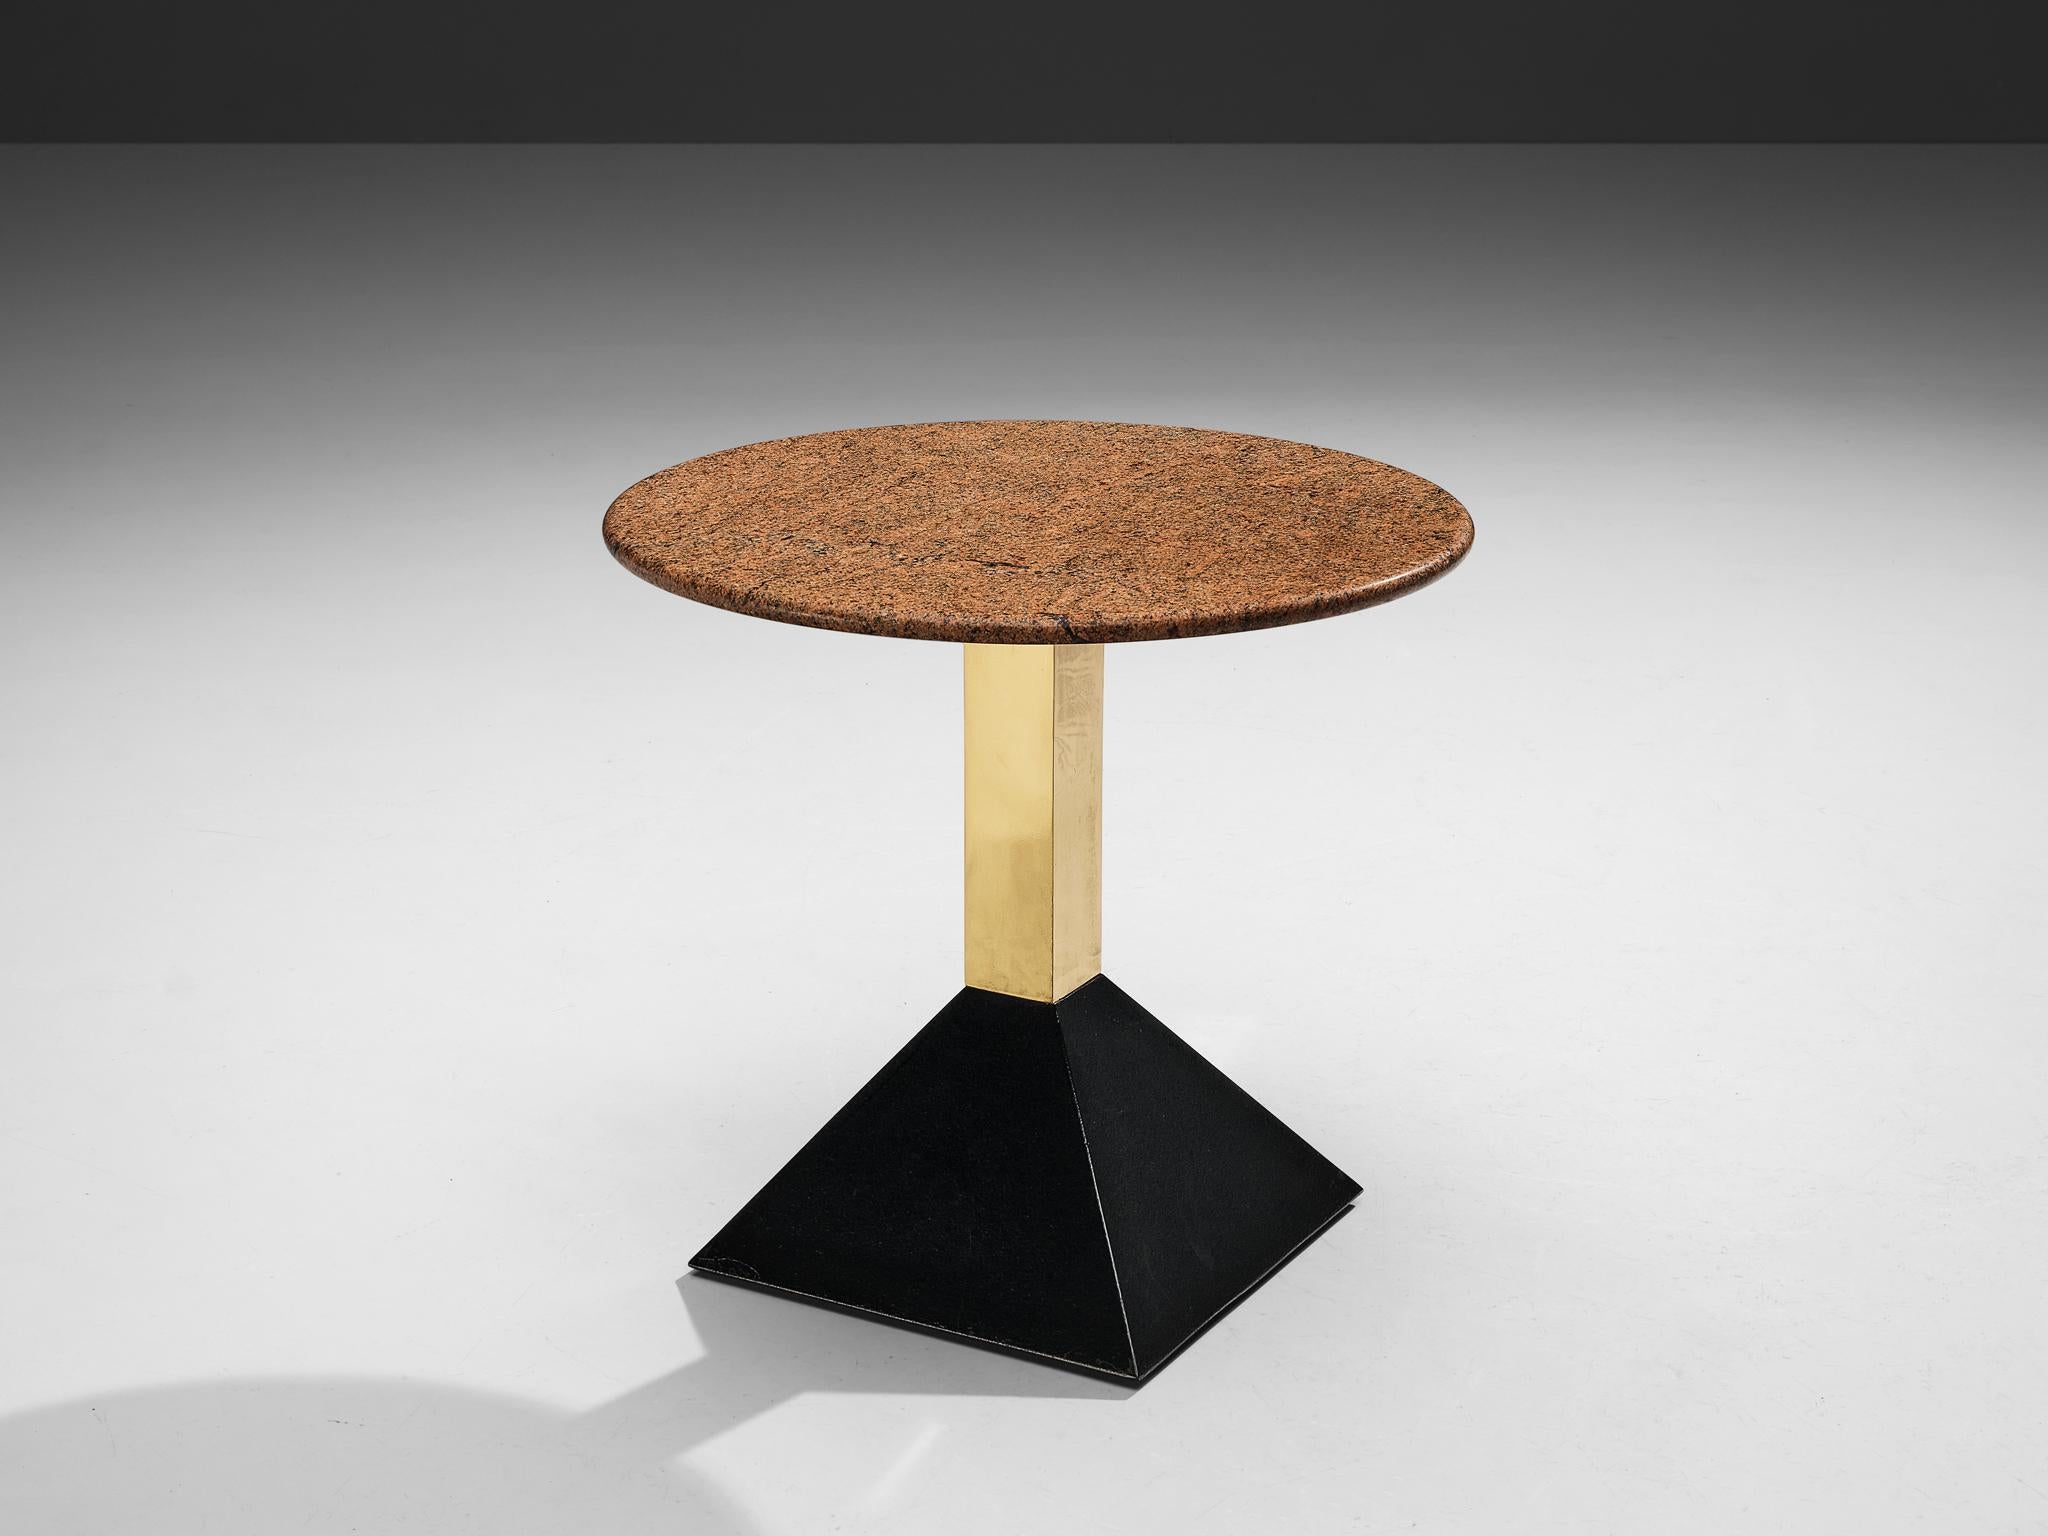 Side table, granite, metal, brass, Italy, 1980s

This side table features a red granite tabletop in round format. The granite shows a vivid surface. A brass pedestal ends in a black trapezoid base in metal. The composition of textures and shapes,